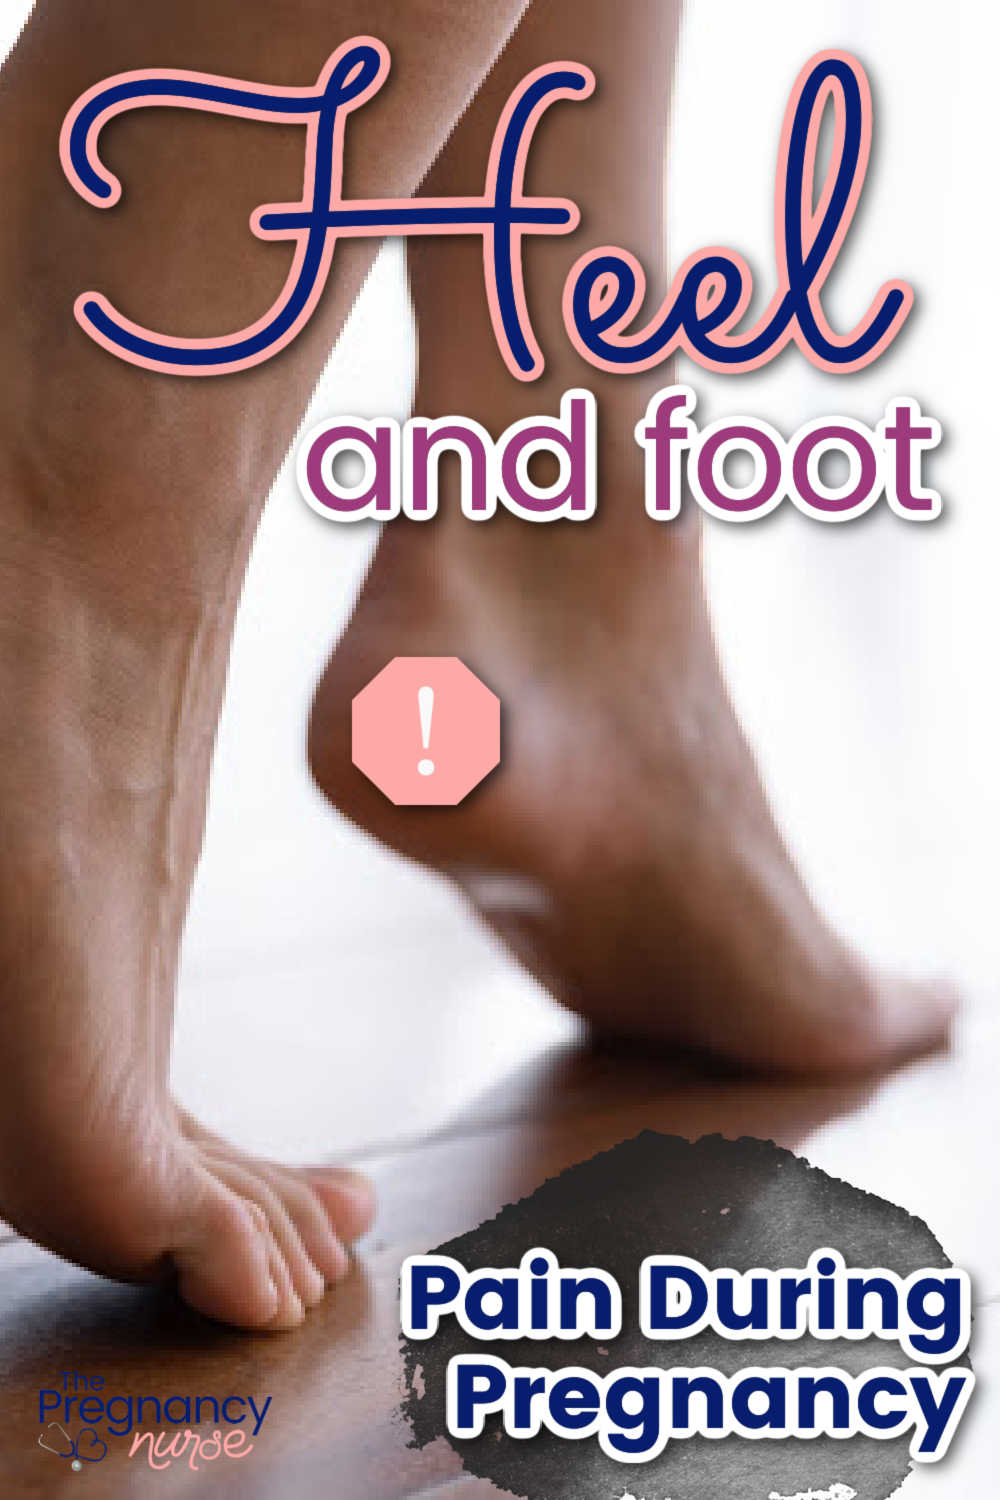 Heel pain in pregnancy can be a really hard condition. As women gain weight, feet changes and changes in the pelvis can really make foot problems an issue. Let’s talk about how to keep our feet healthy as we navigate pregnancy.